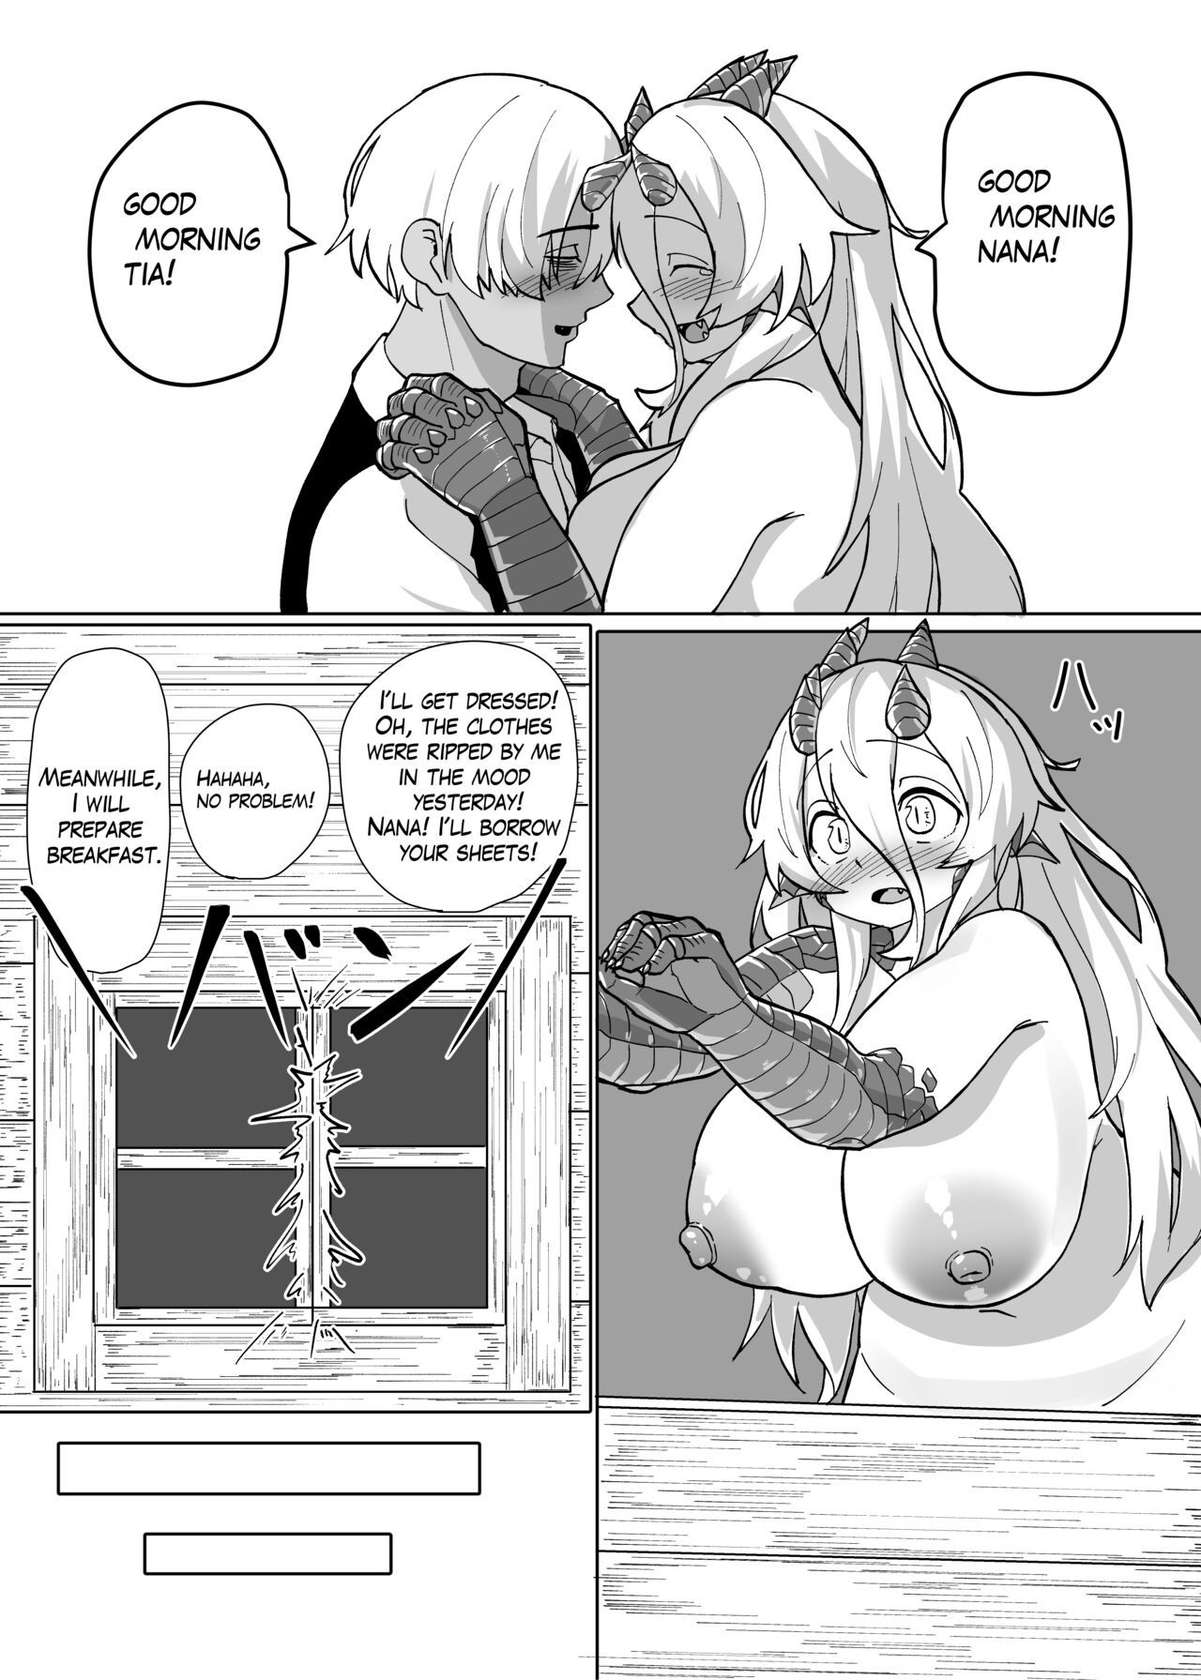 [Saikutsu Kichi (Kagarimachi Konatsu)] Because That Night Was The Happiest They've Ever Been - Persecuted Dragon Girl and an Assassin at His Limit Forget Human Speech and Have Beastly Sex[English] [Digital]